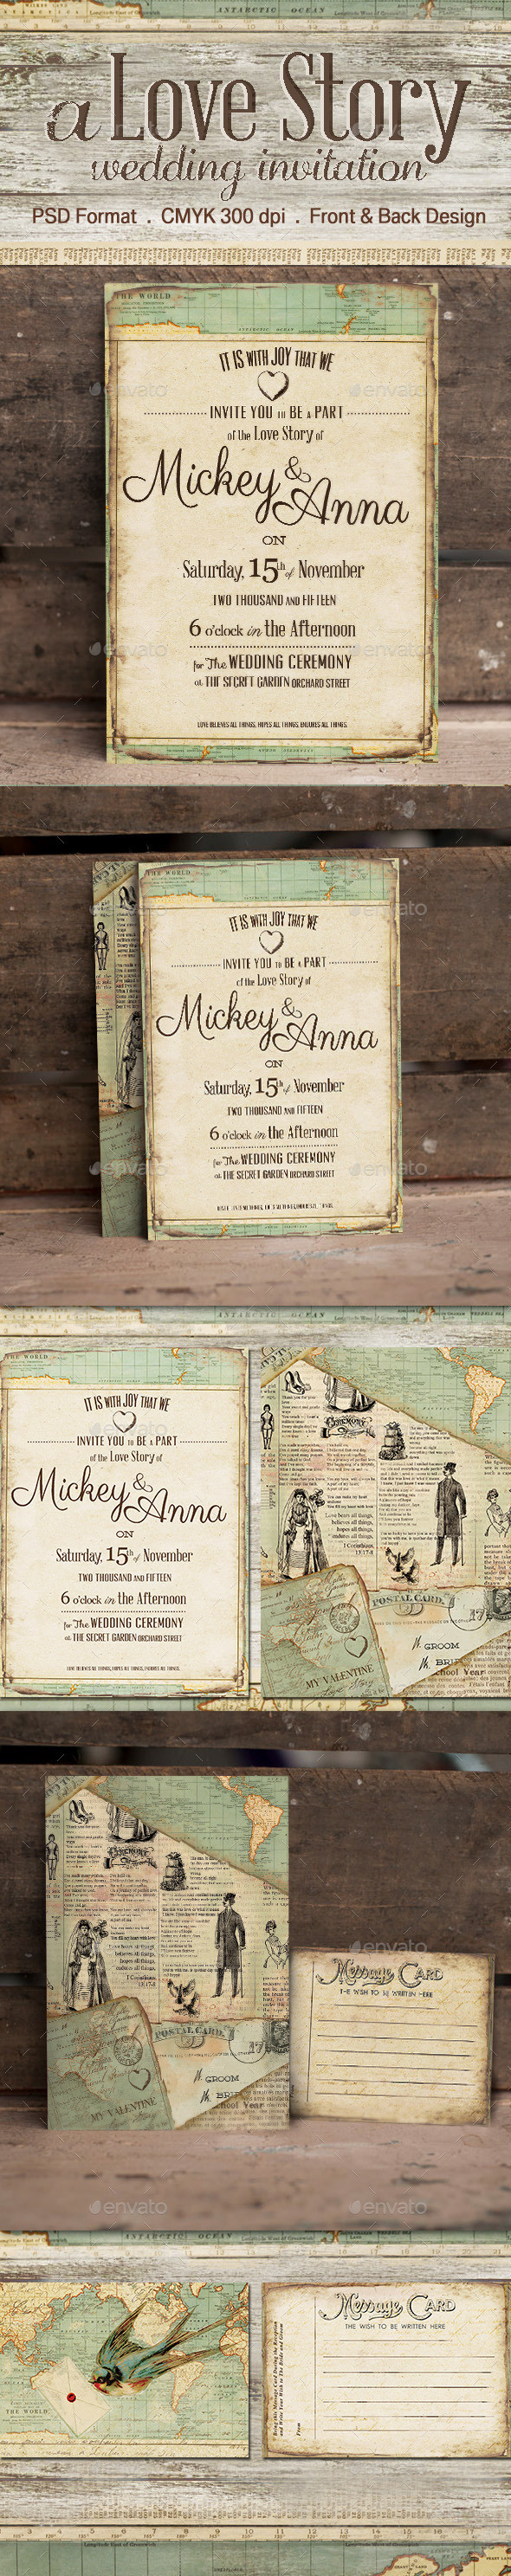 The 20journey 20wedding 20invitation 20  20image 20preview